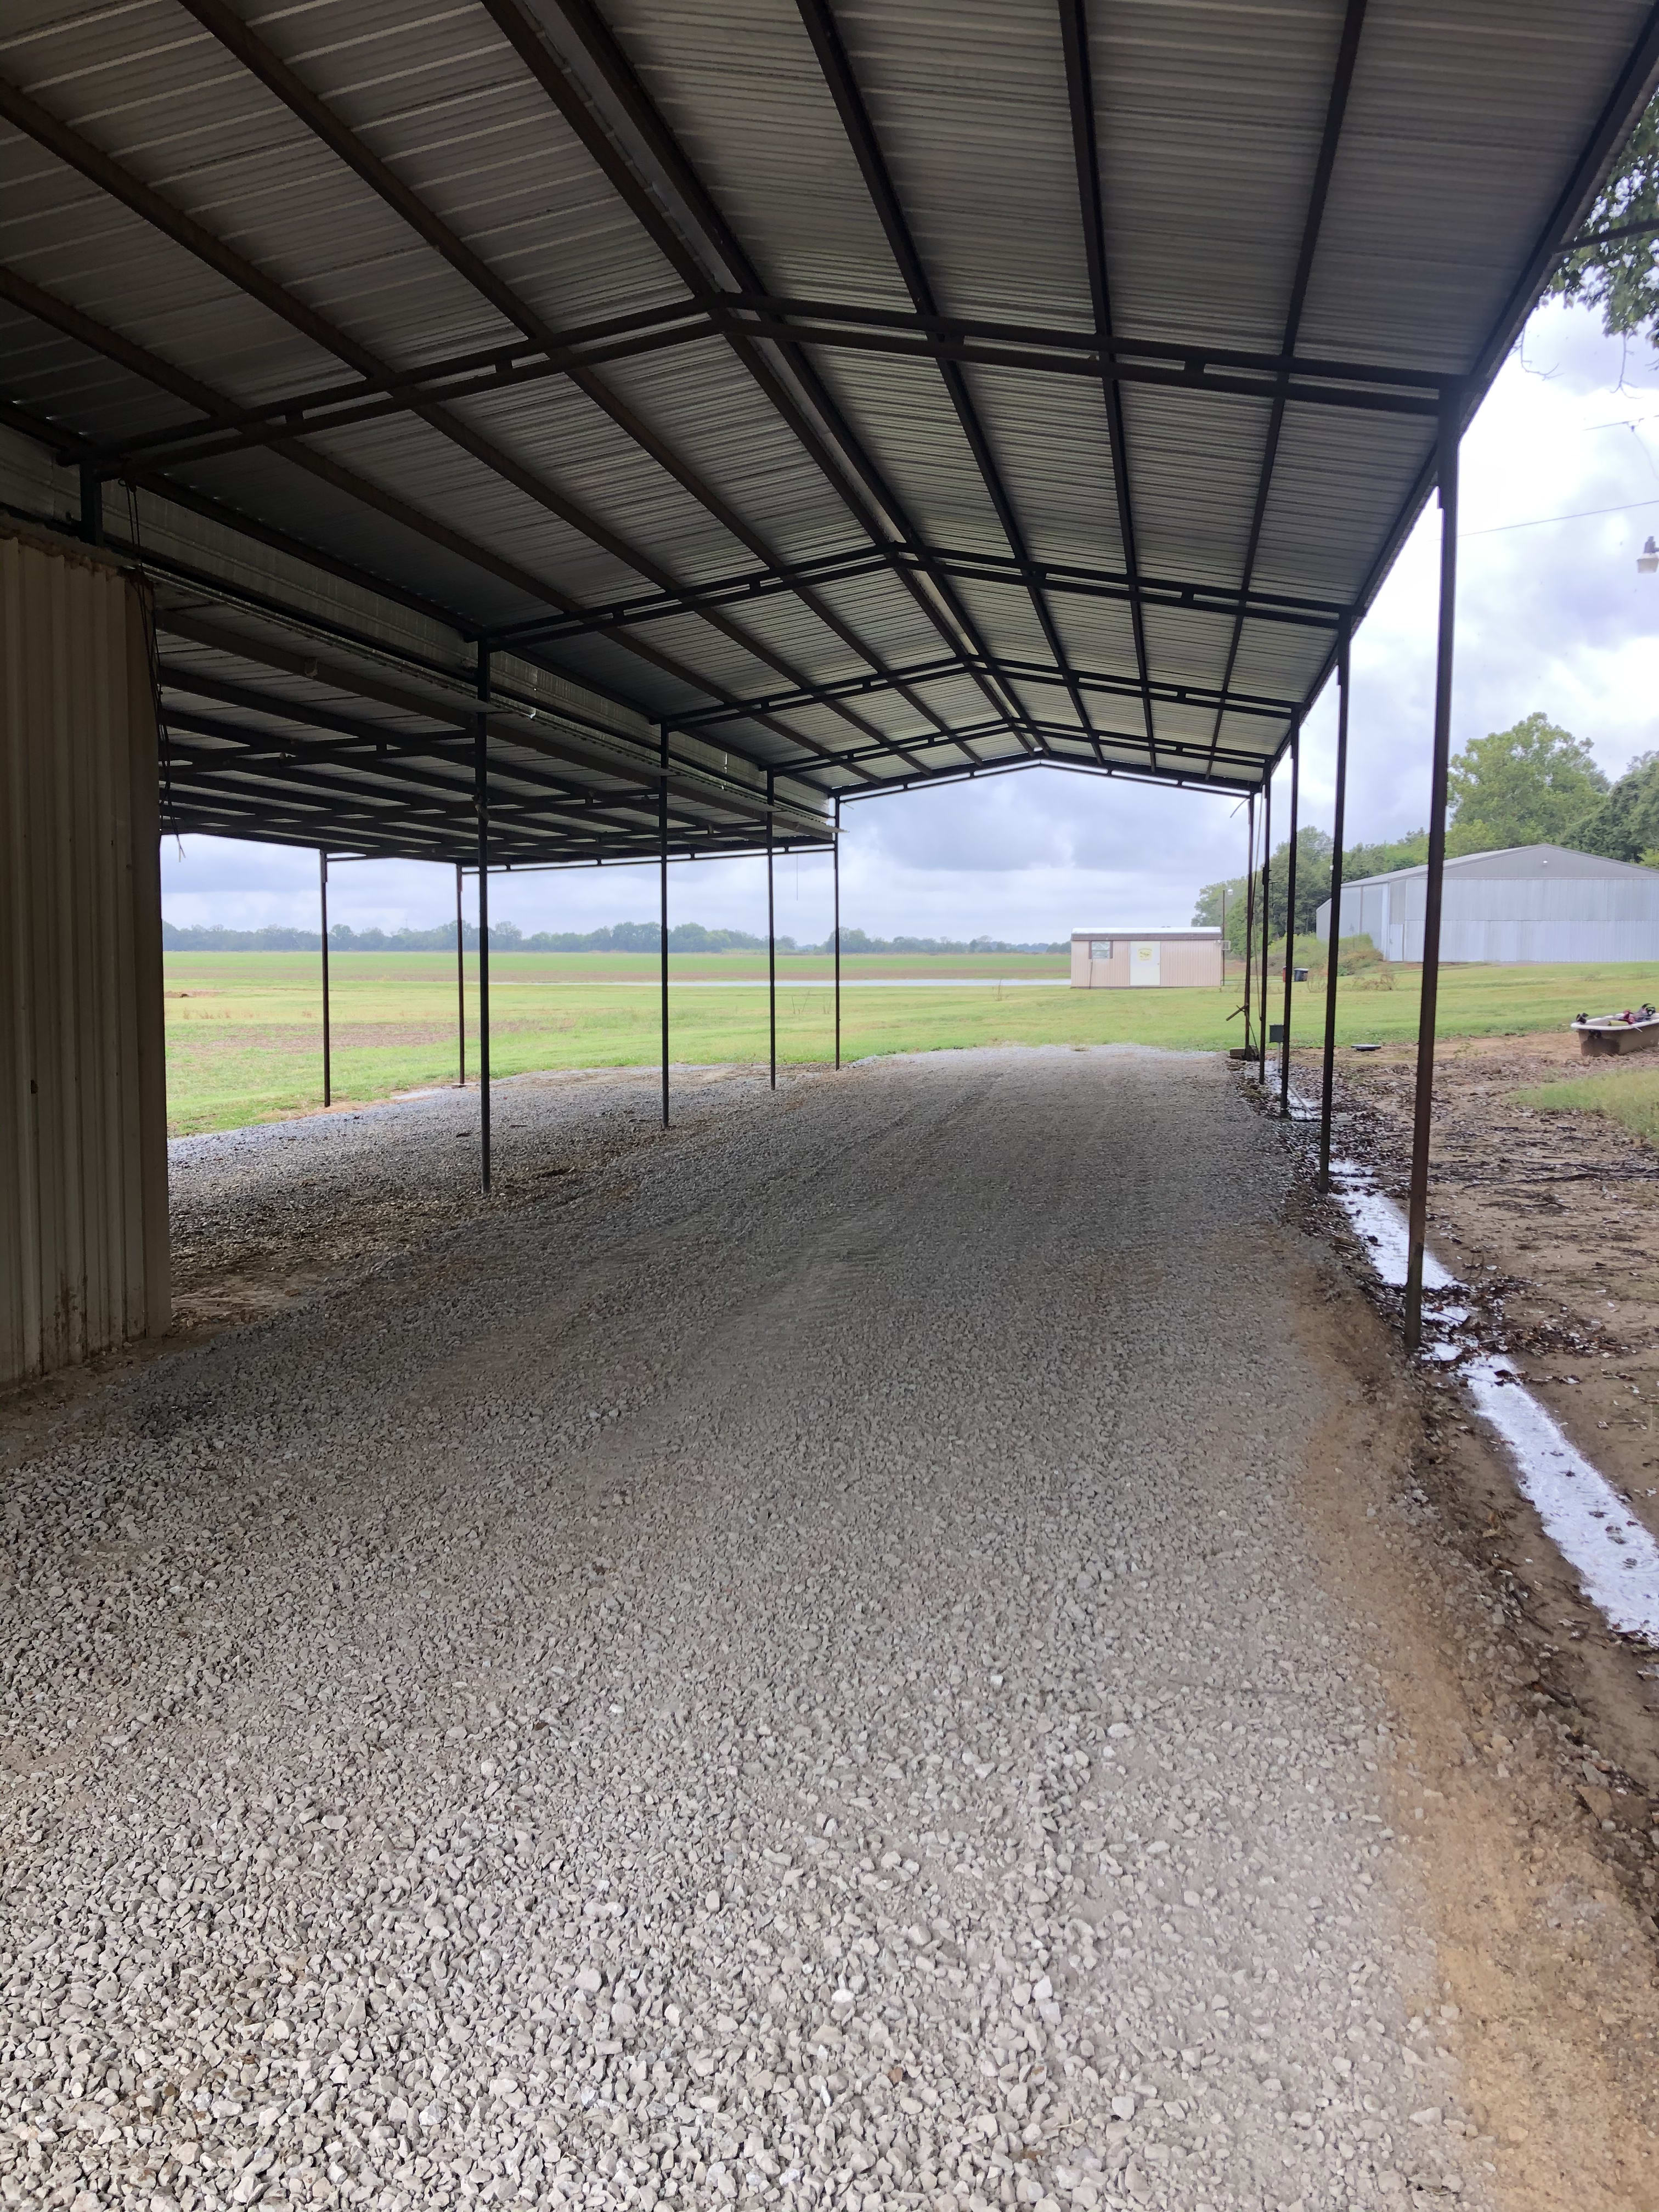 Covered shed for rv and vehicles